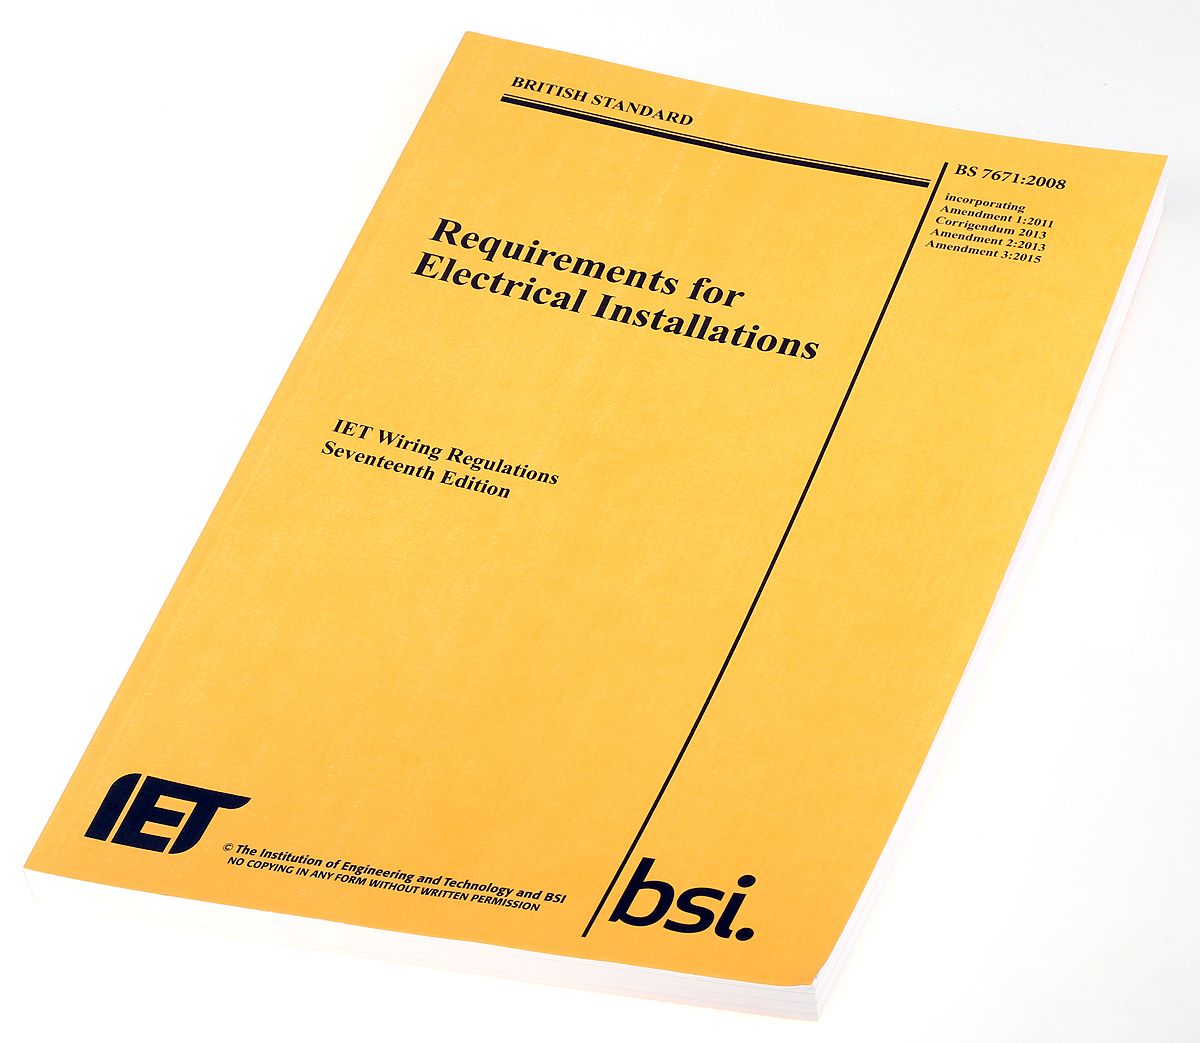 Requirements for Electrical Installation: IET Wiring Regulations, 17th edition by The IET